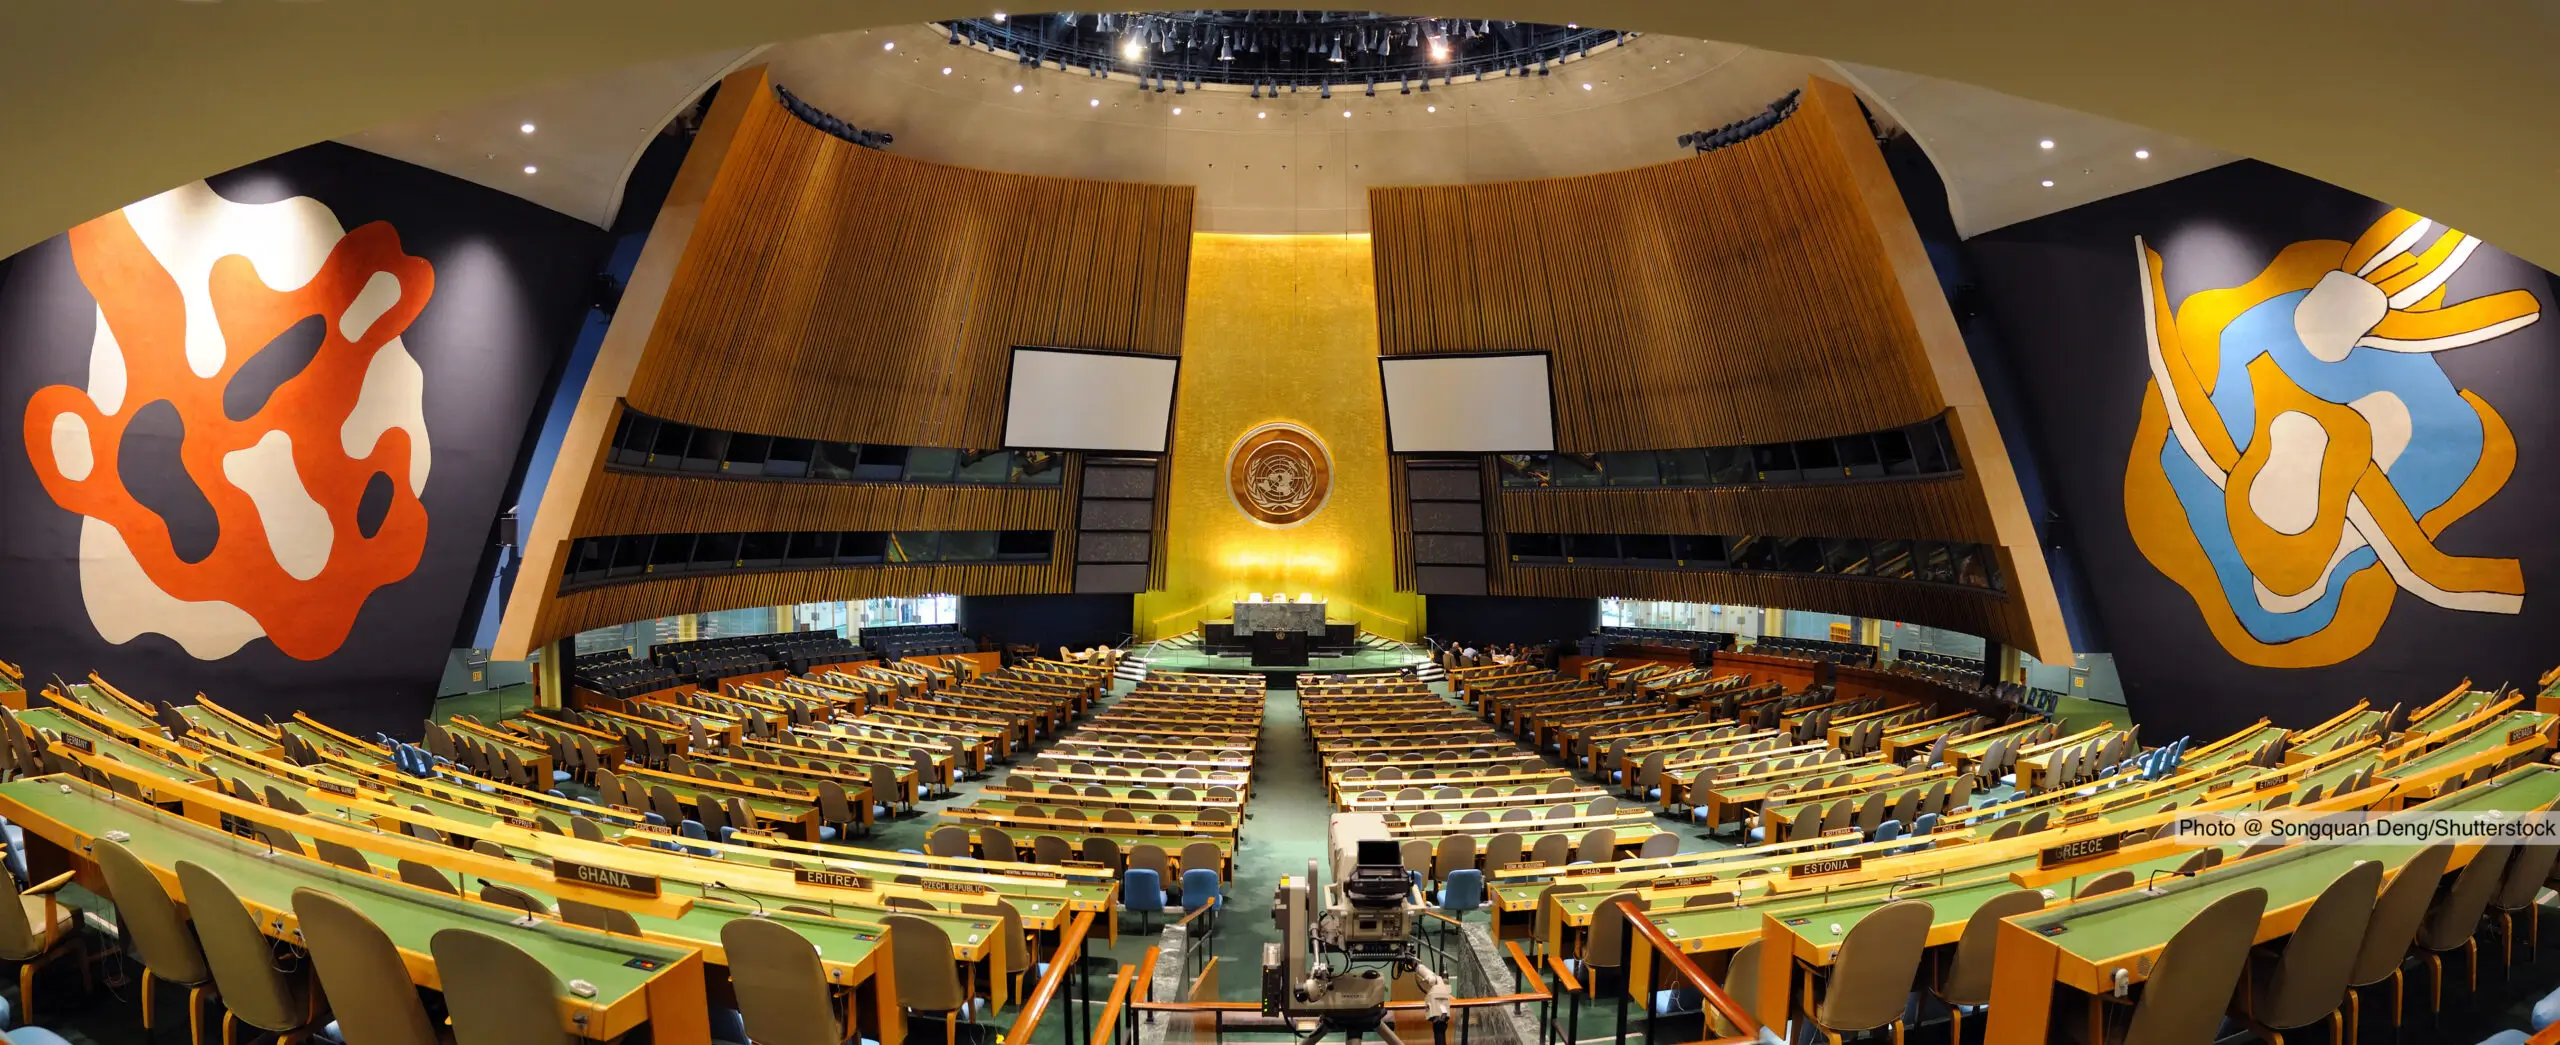 UN Has Approved Pakistan’s Resolution on Right To Self-Determination